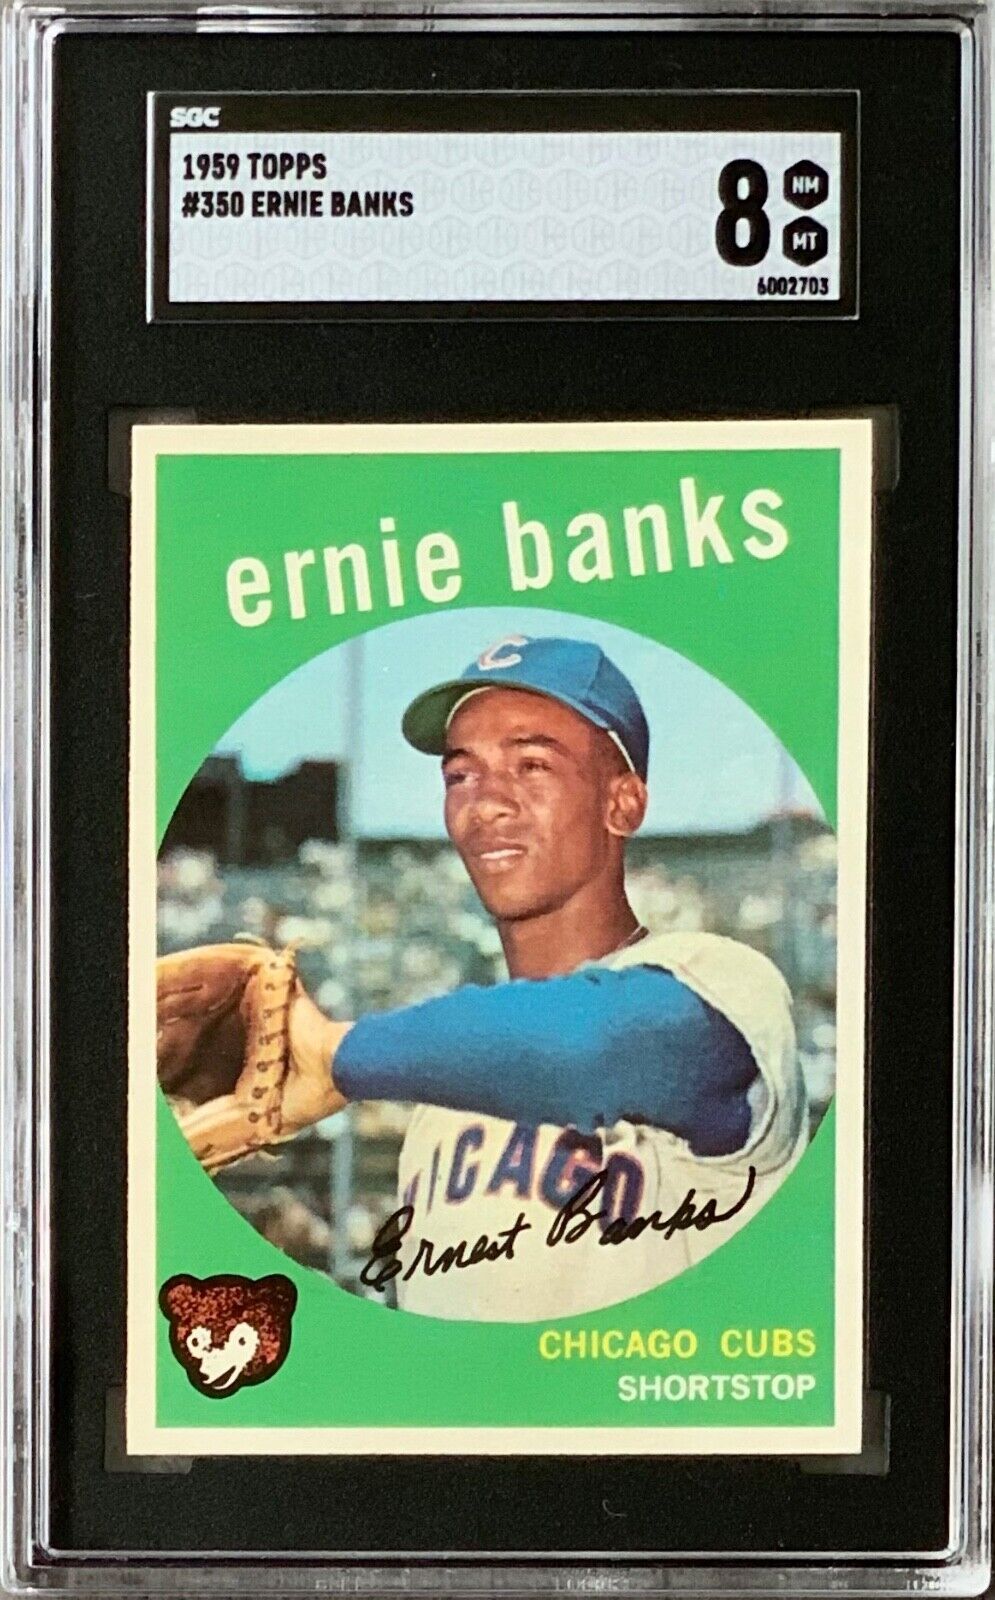 1959 TOPPS ERNIE BANKS #350 NM-MT SGC 8  WELL CENTERED +FREE SHIPPING!